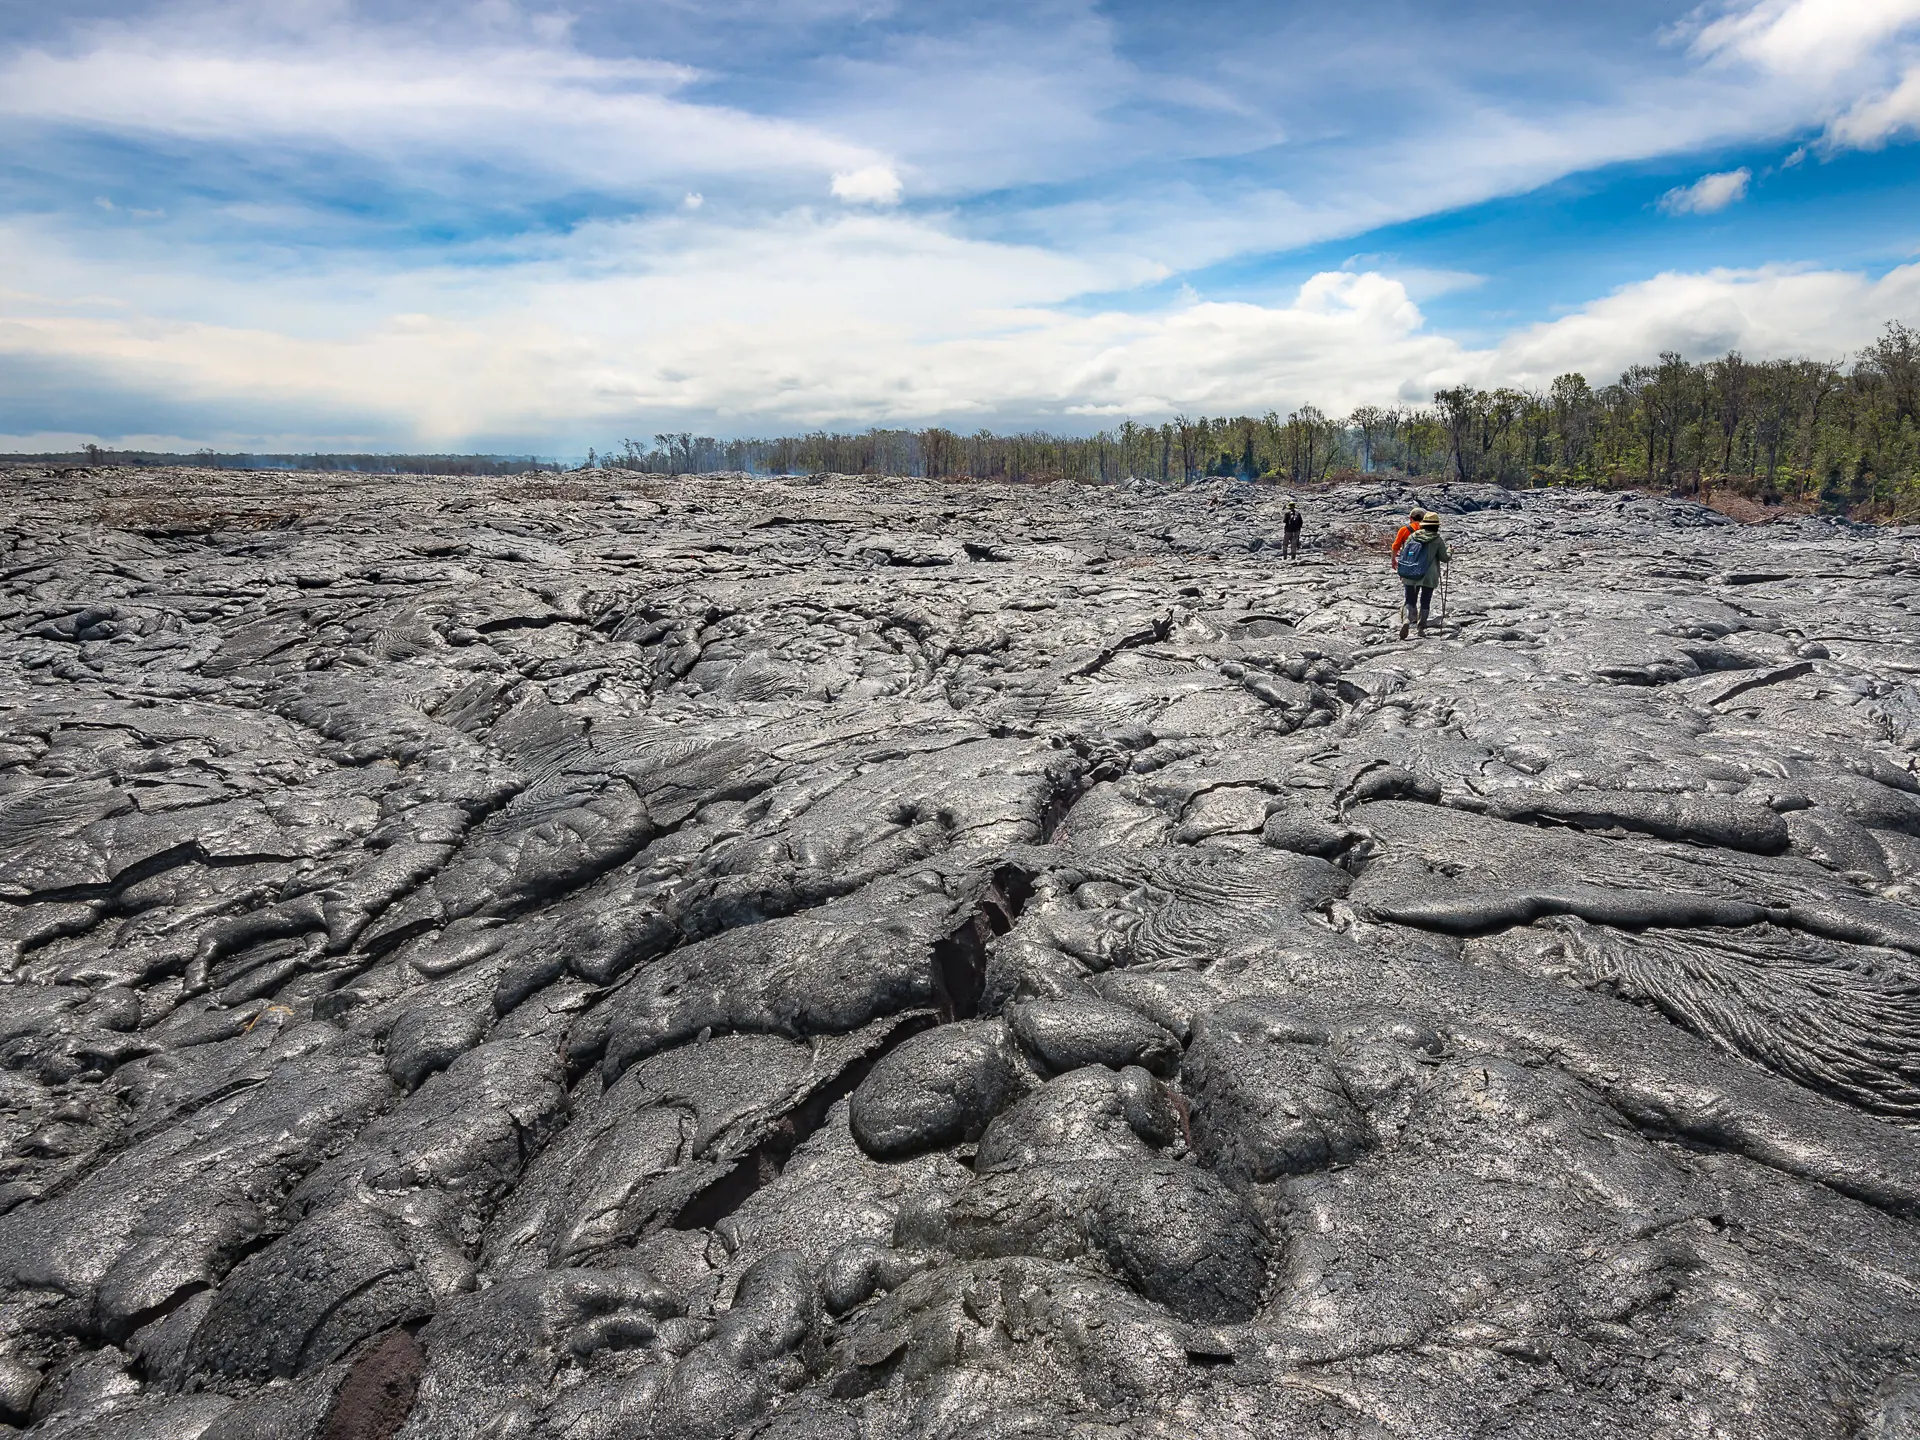 shutterstock_508860874 Hiking on extremely hot lava bed. Advanture activity in Hawaii Vocalnoes National Park.jpg